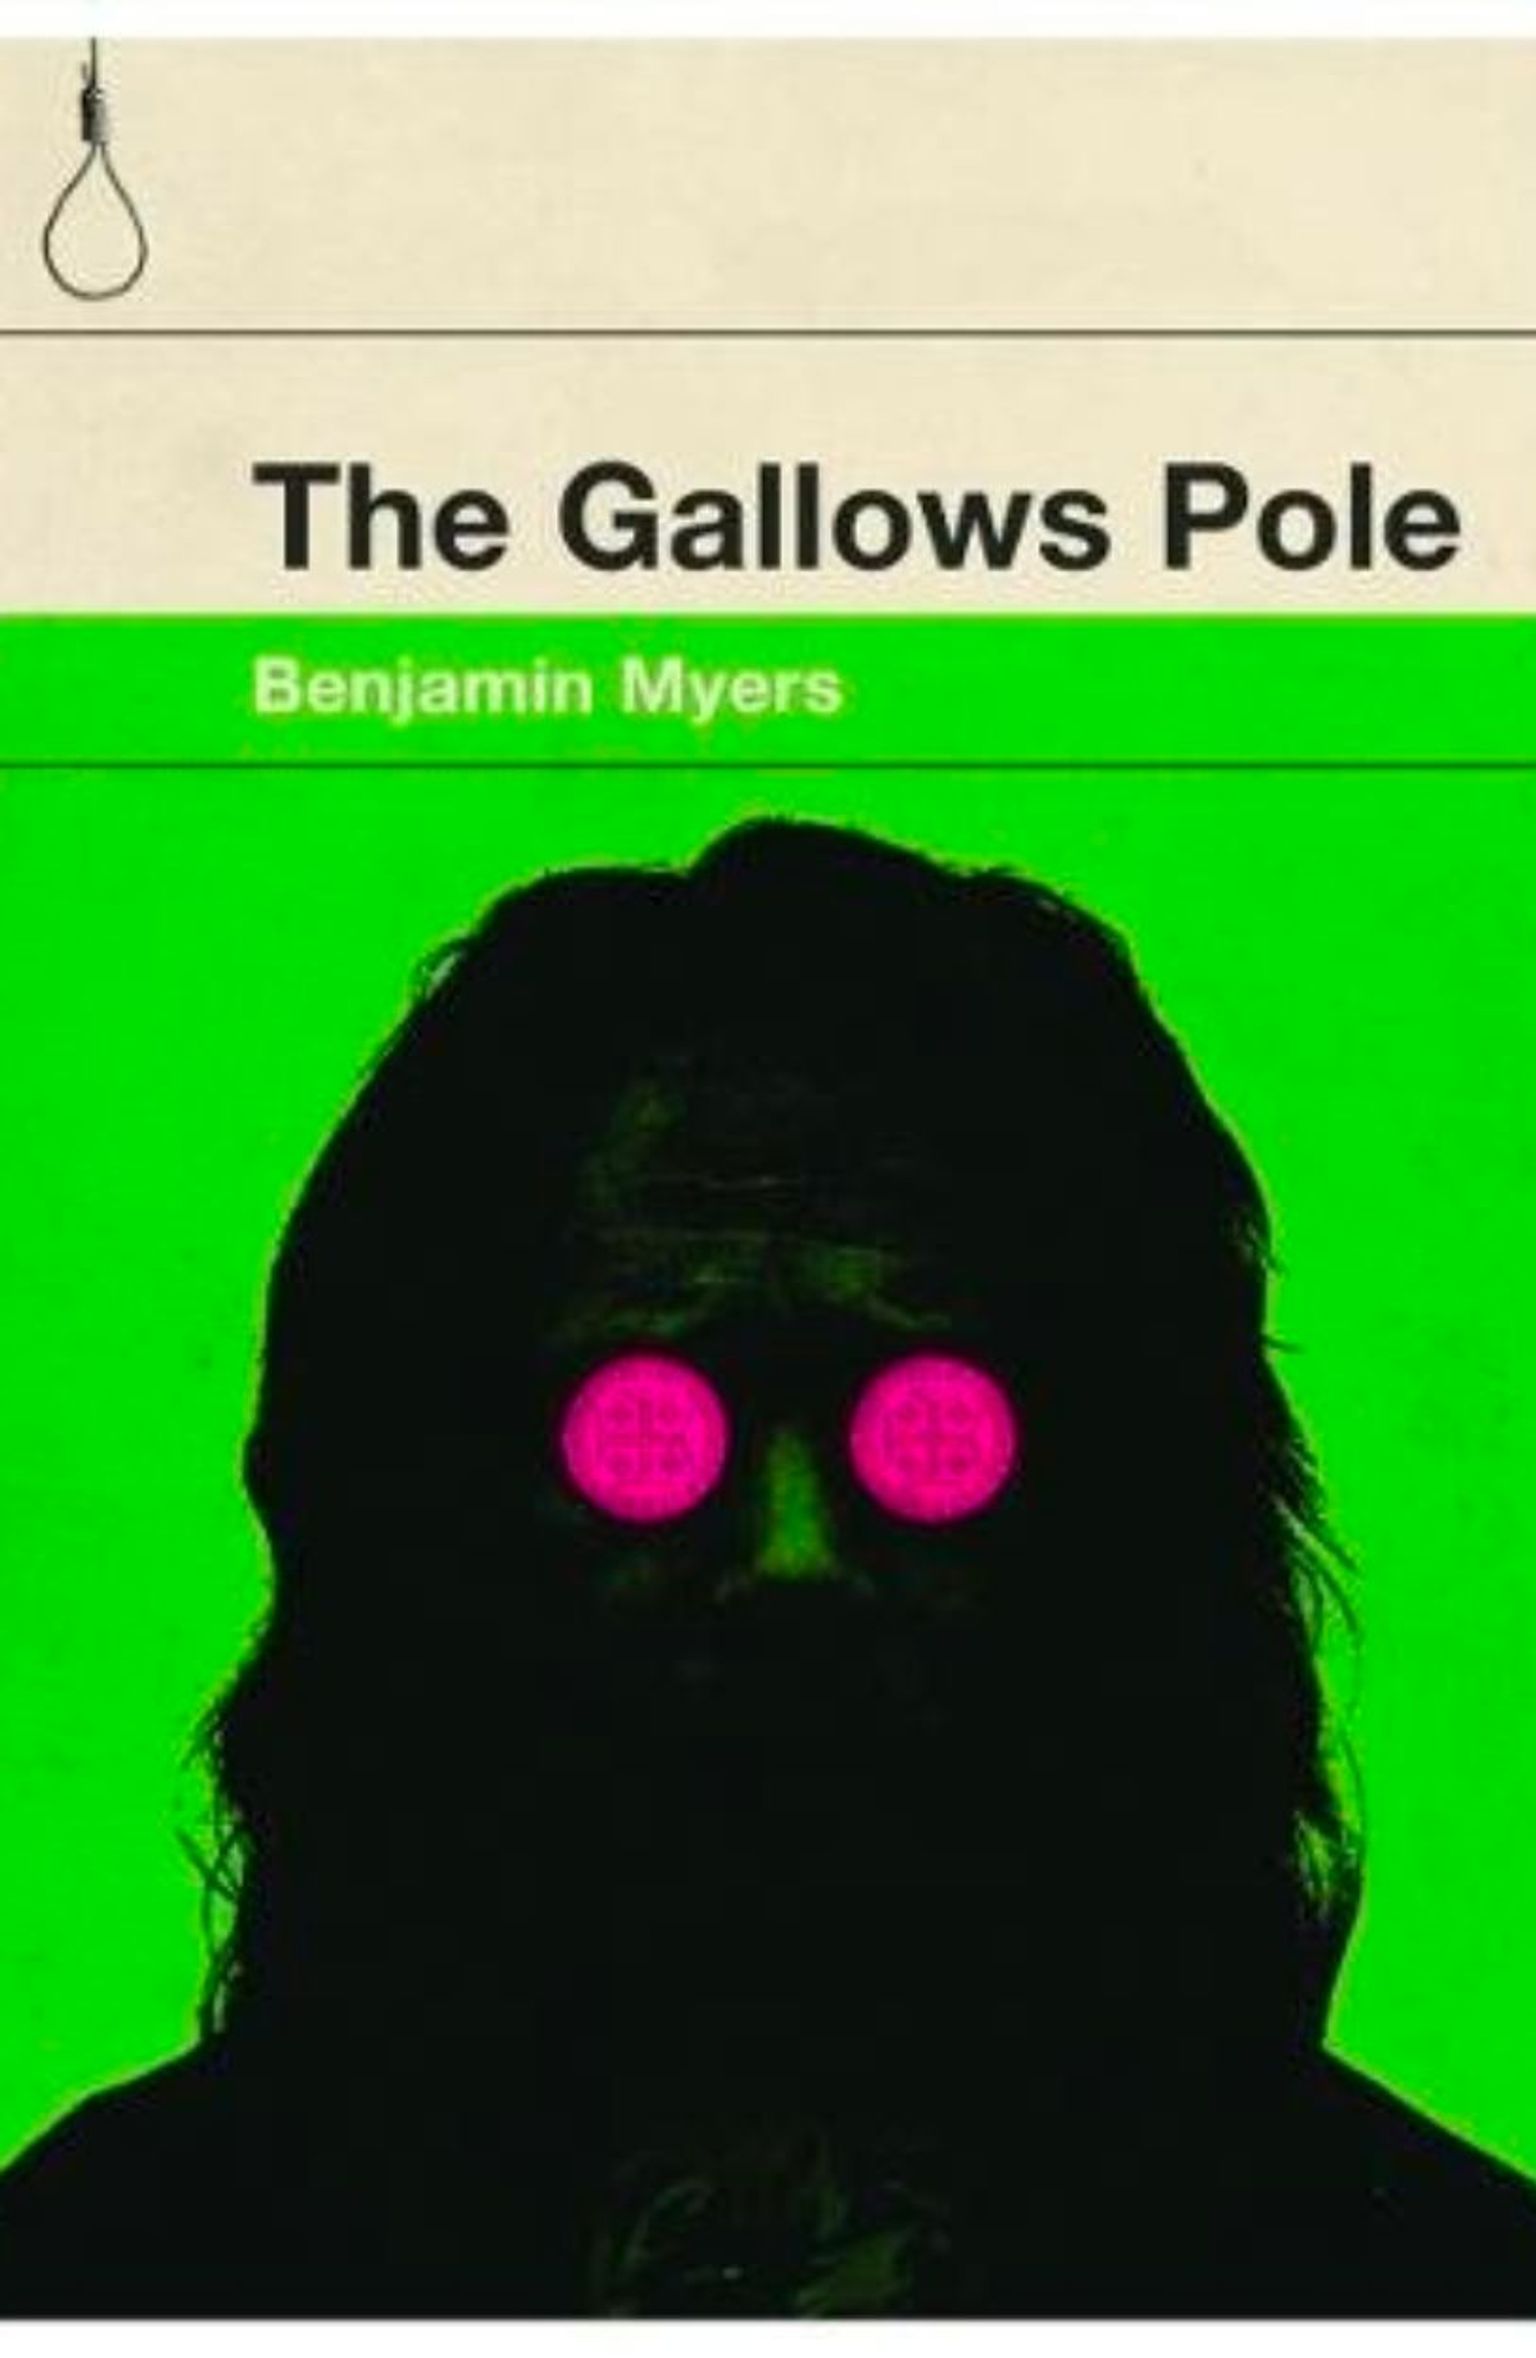 Book Recommendations - The Gallows Pole